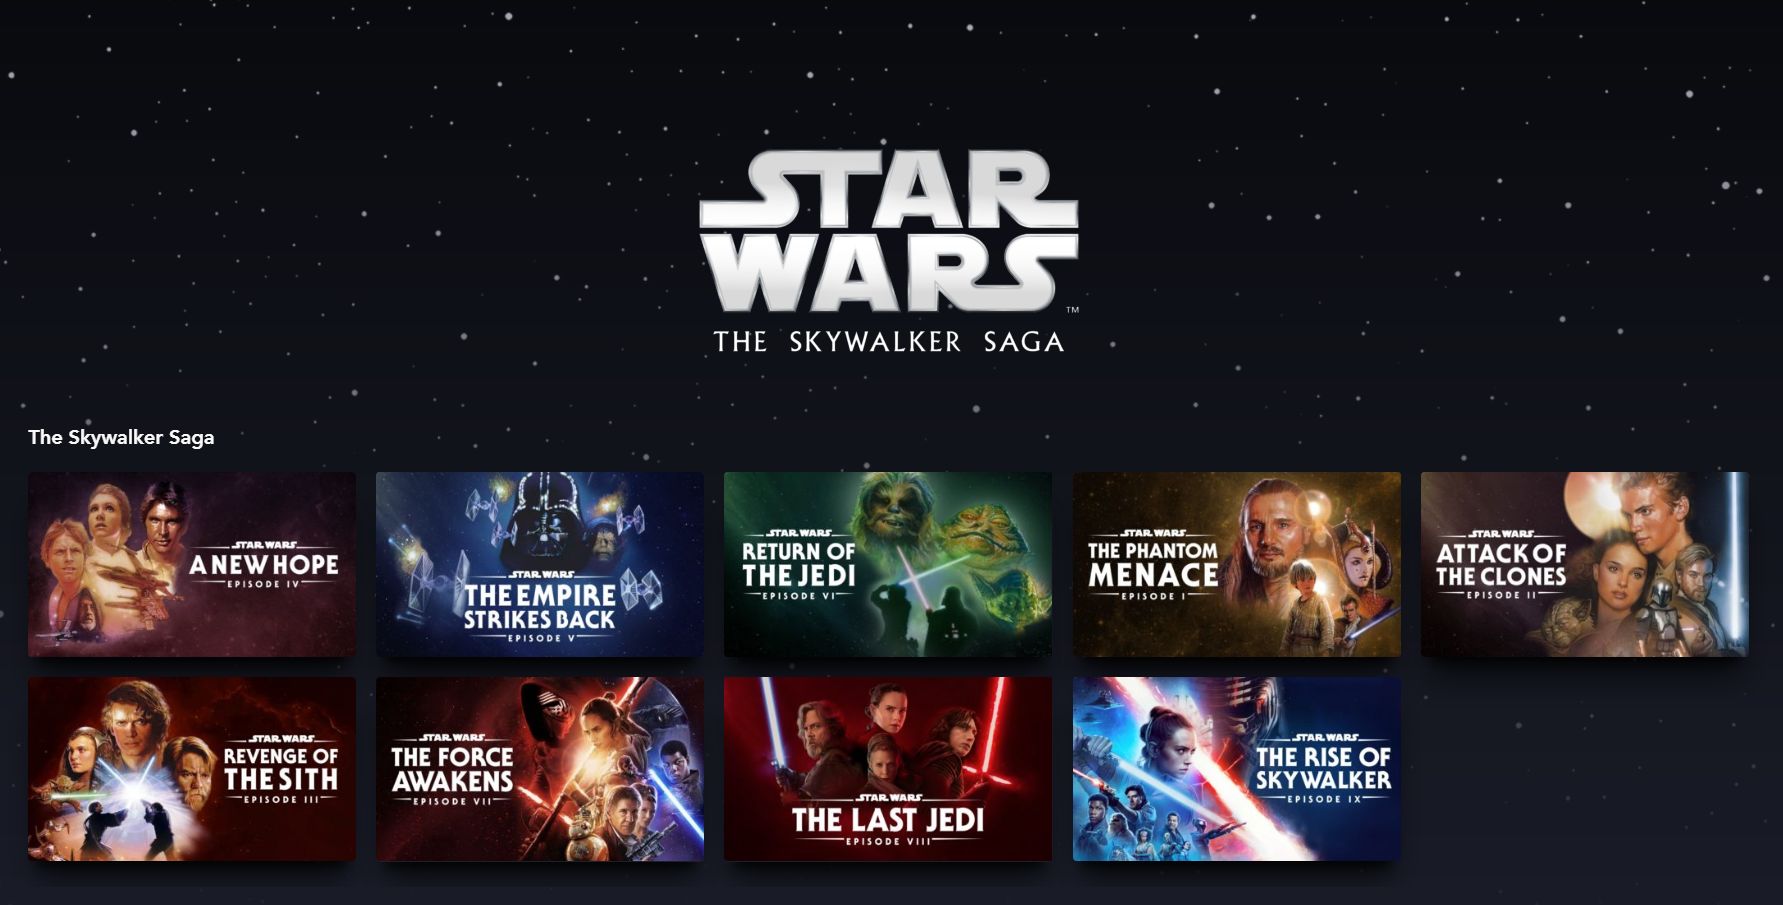 where can i watch the star wars movies?